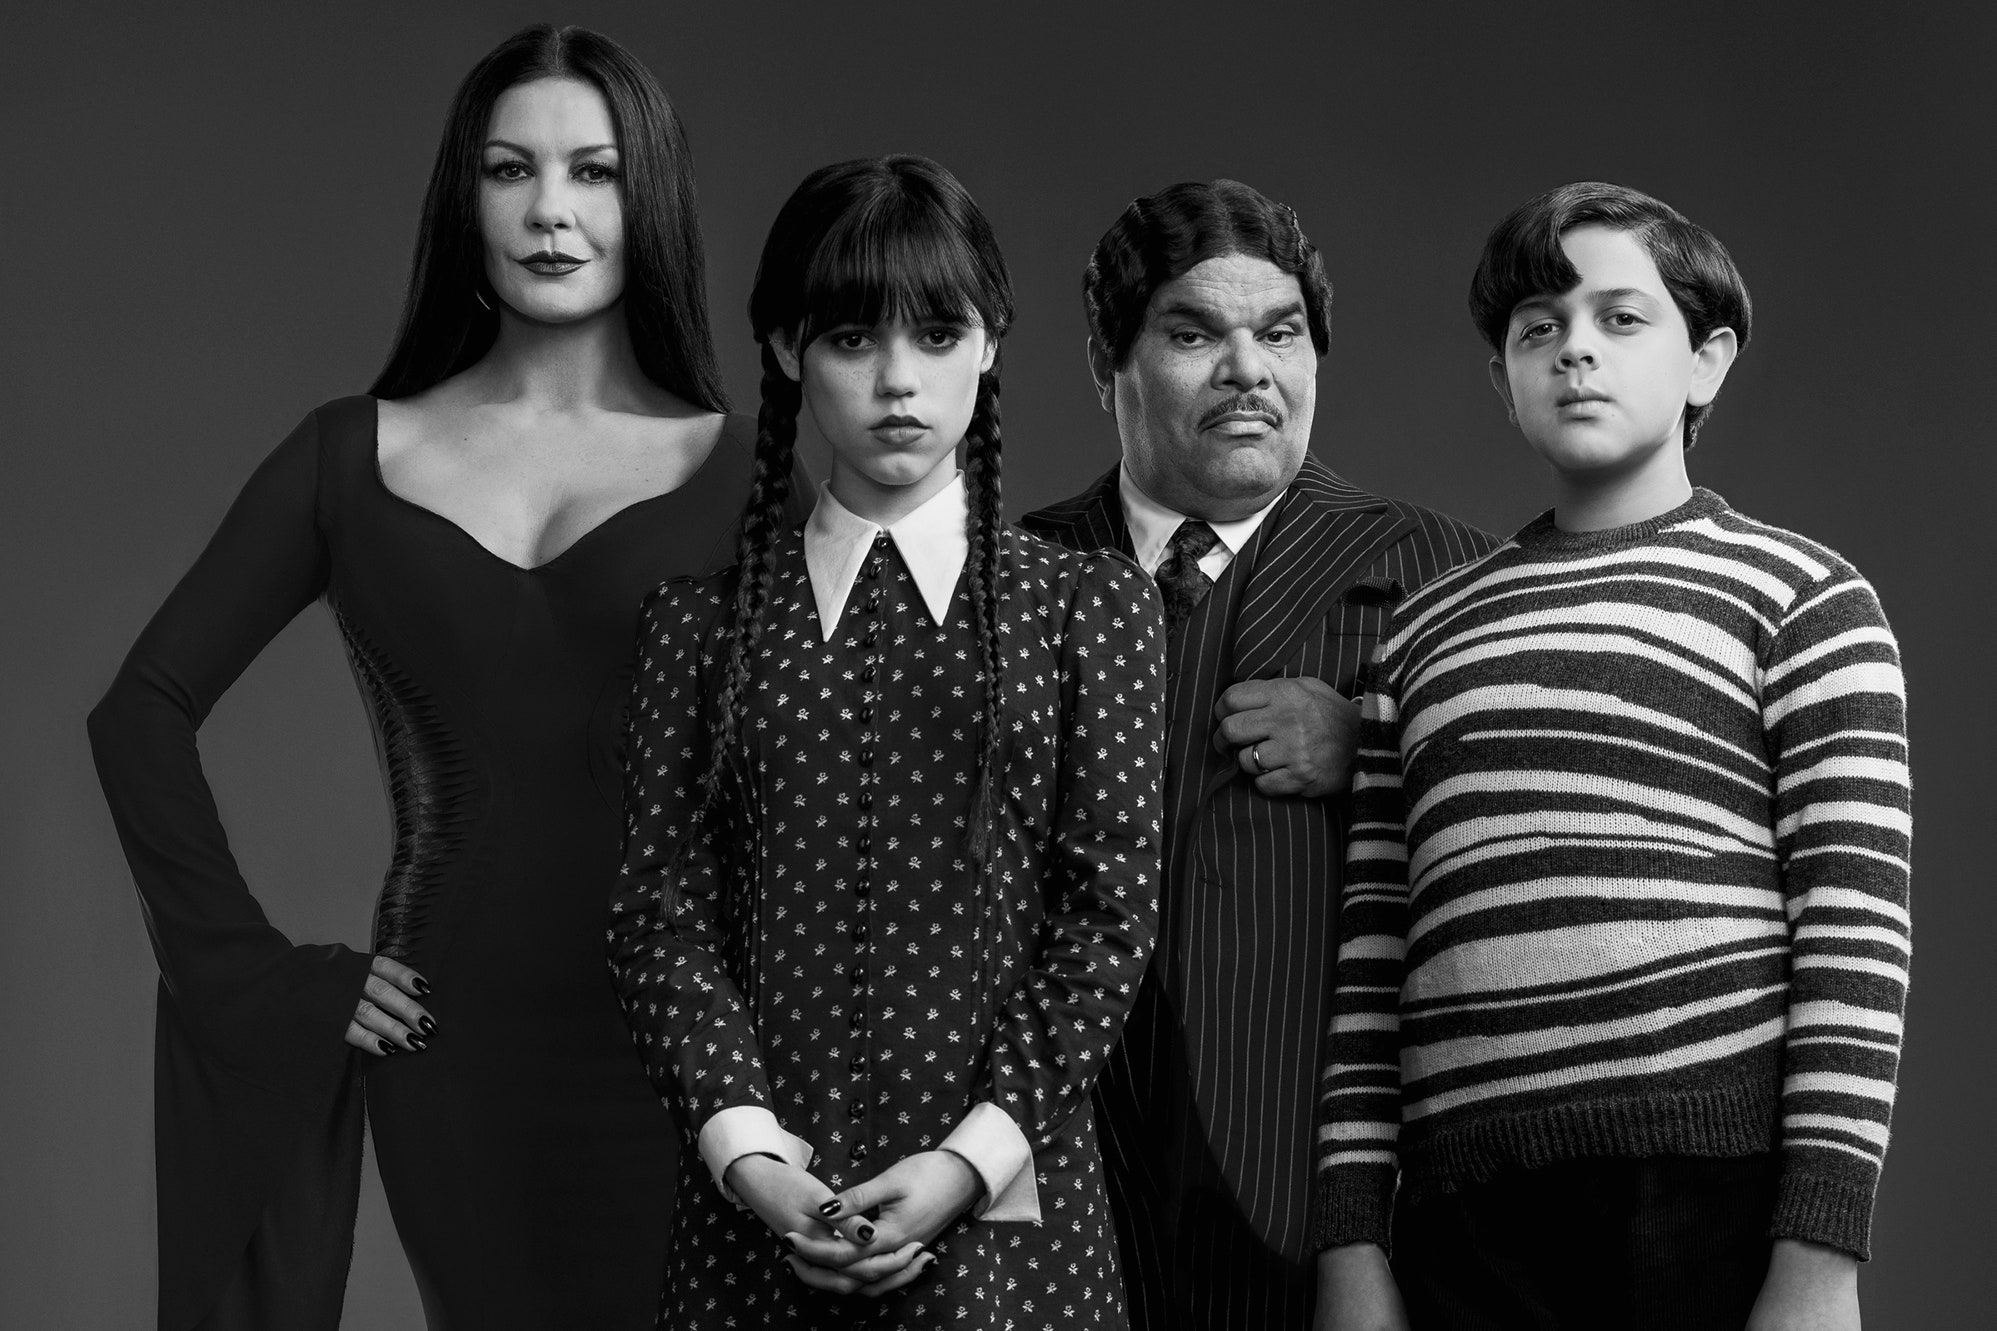 The Addams Family / The Addams Family (1991)